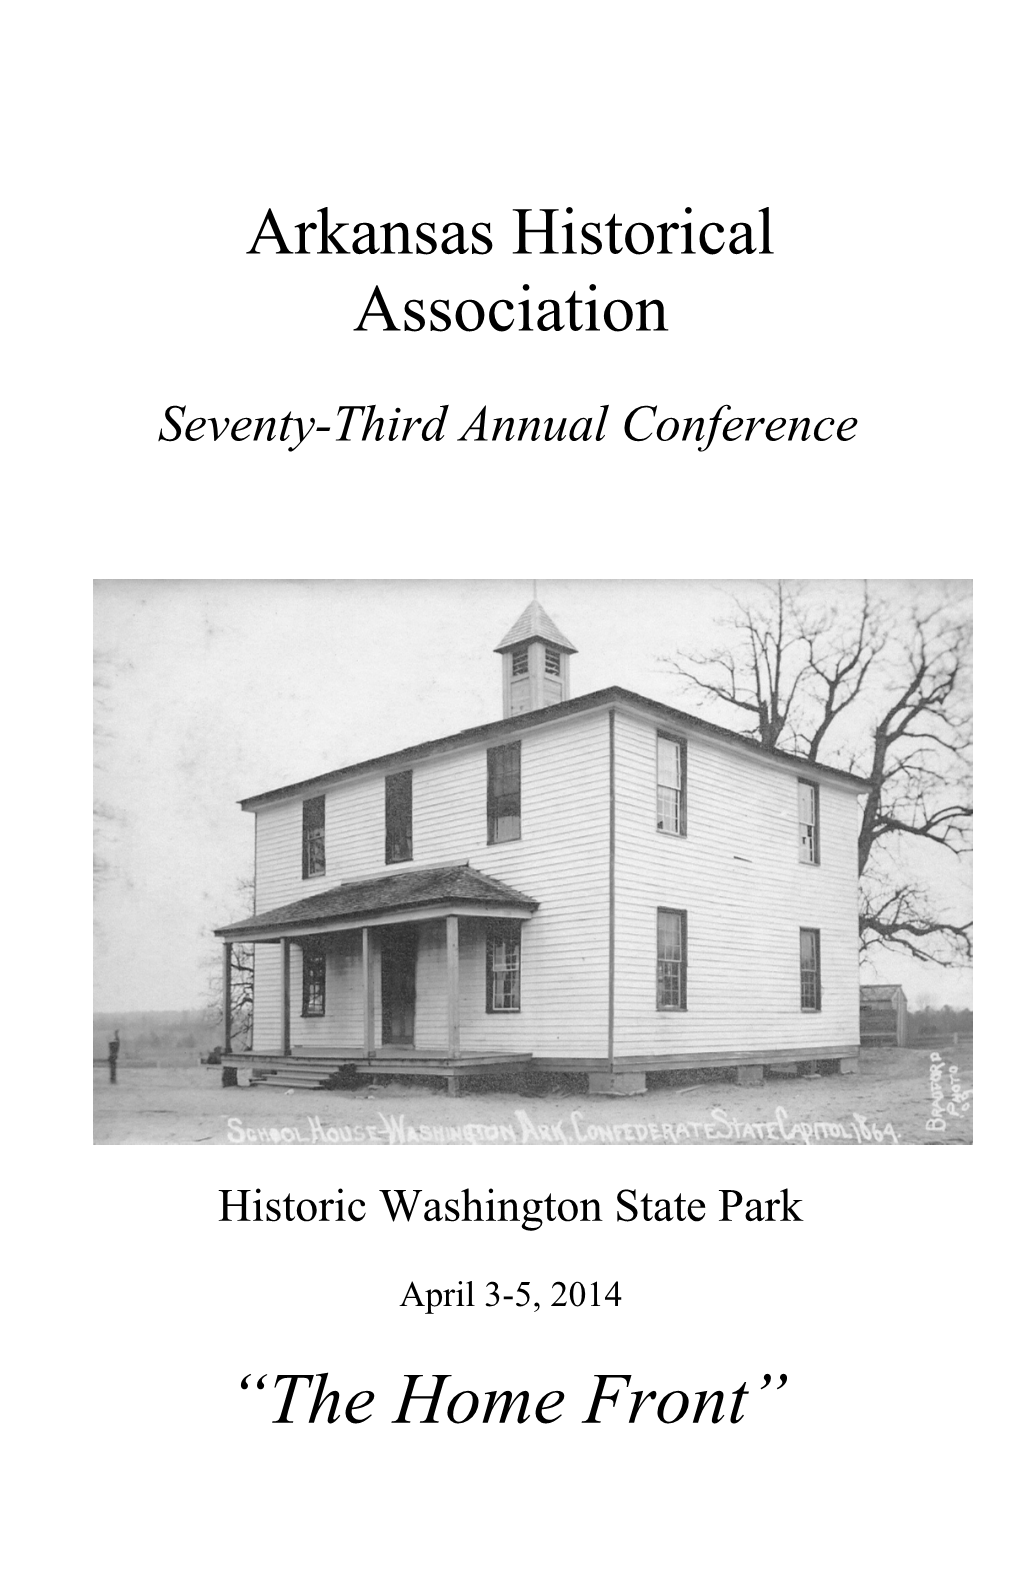 Seventy-Third Annual Conference